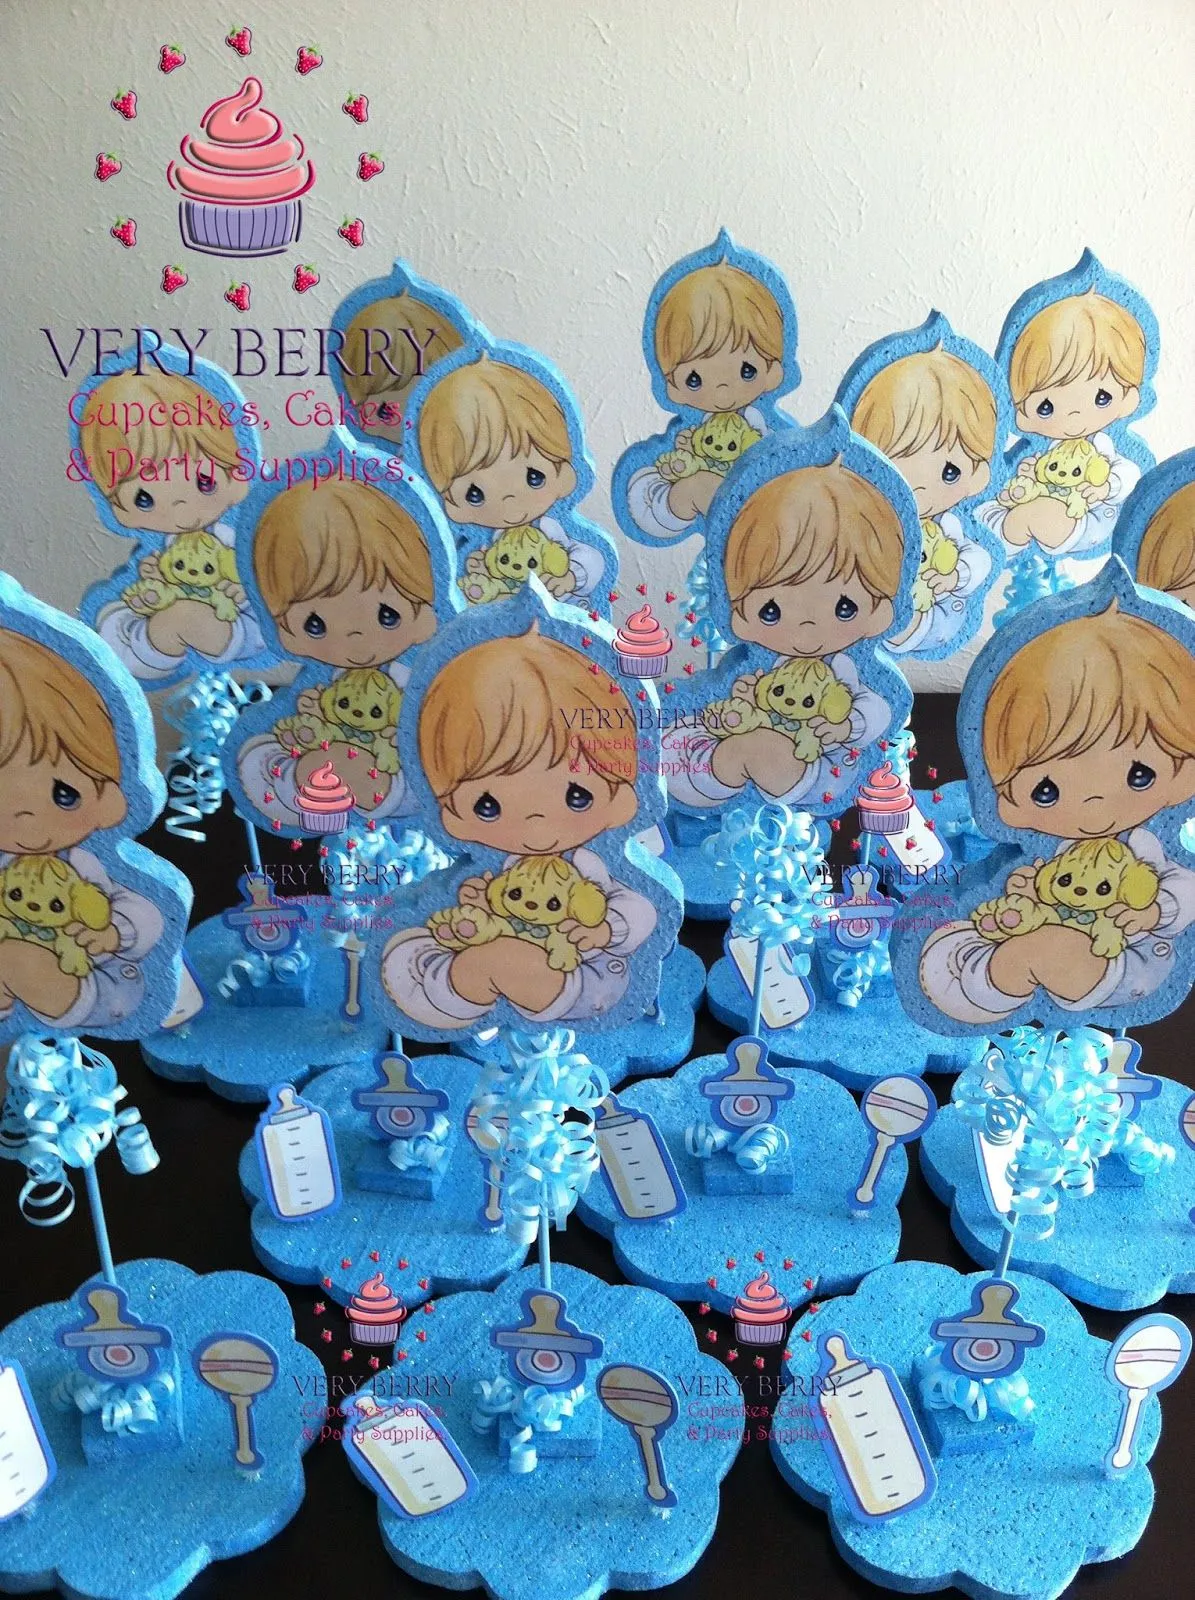 Veryberry Cupcakes: BABY BOY PRECIOUS MOMENTS GLITTER CENTERPIECES